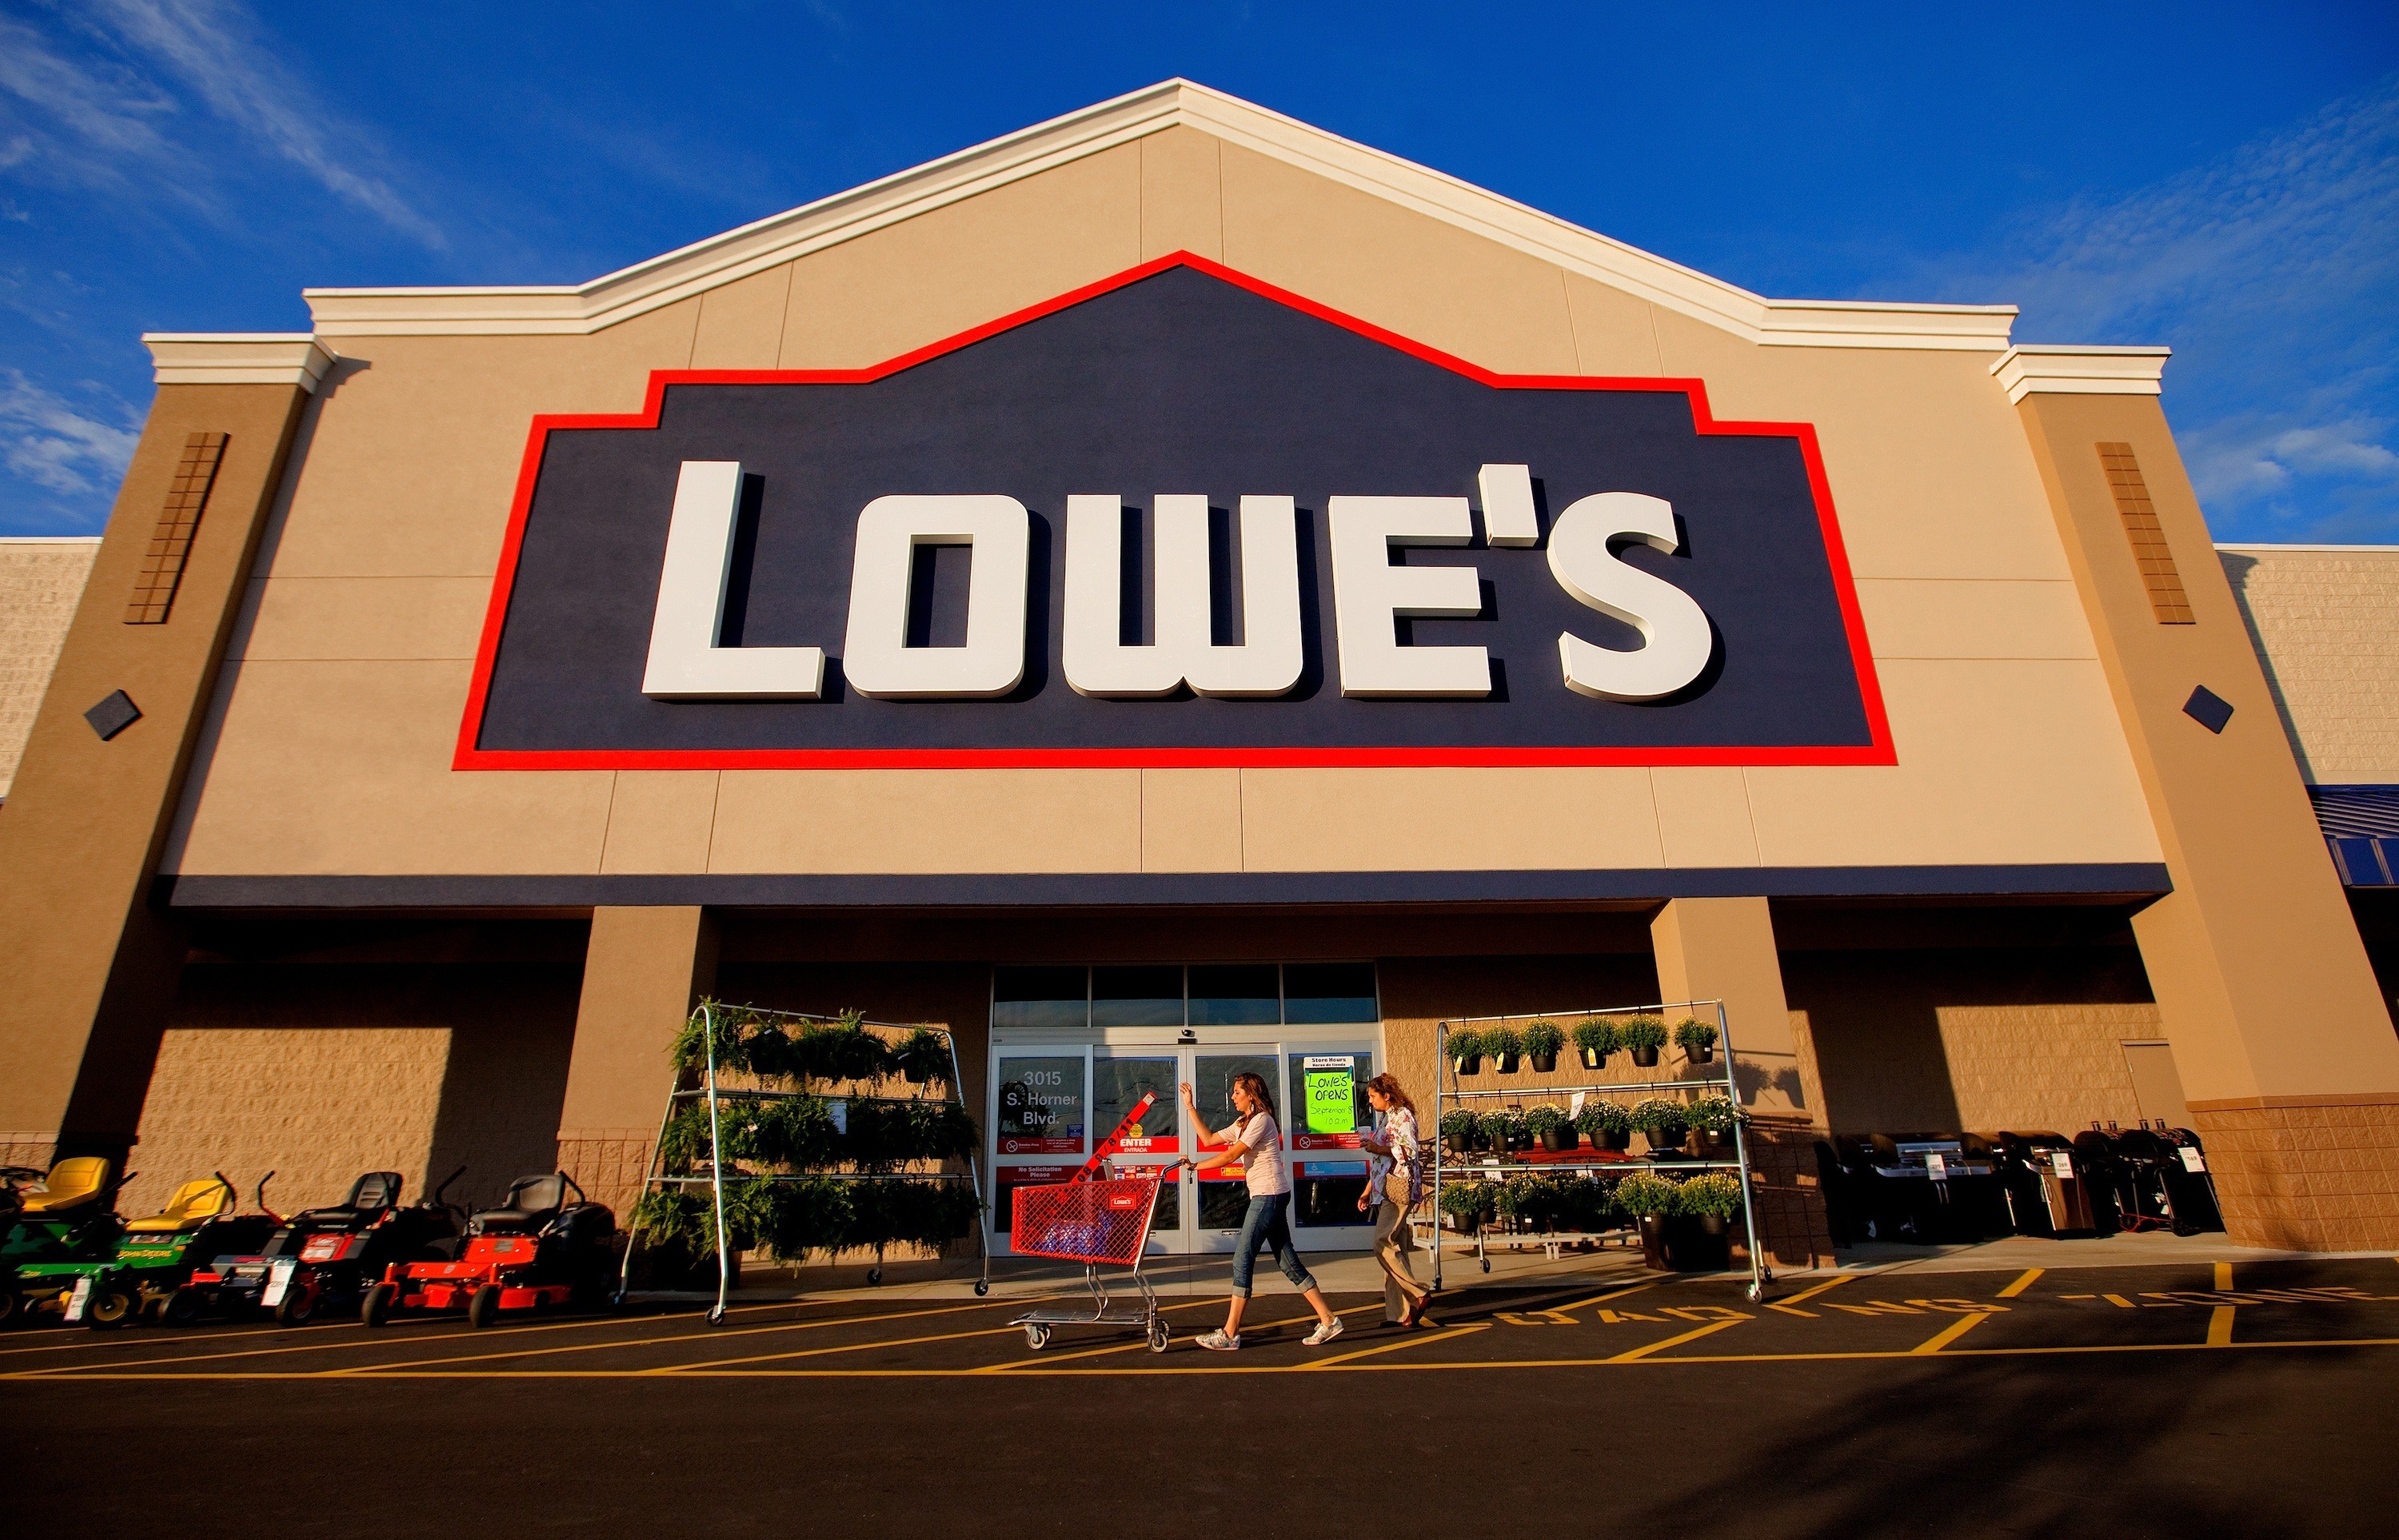 Buy a $200 Lowe’s Gift Card, Get a FREE $20 Credit!